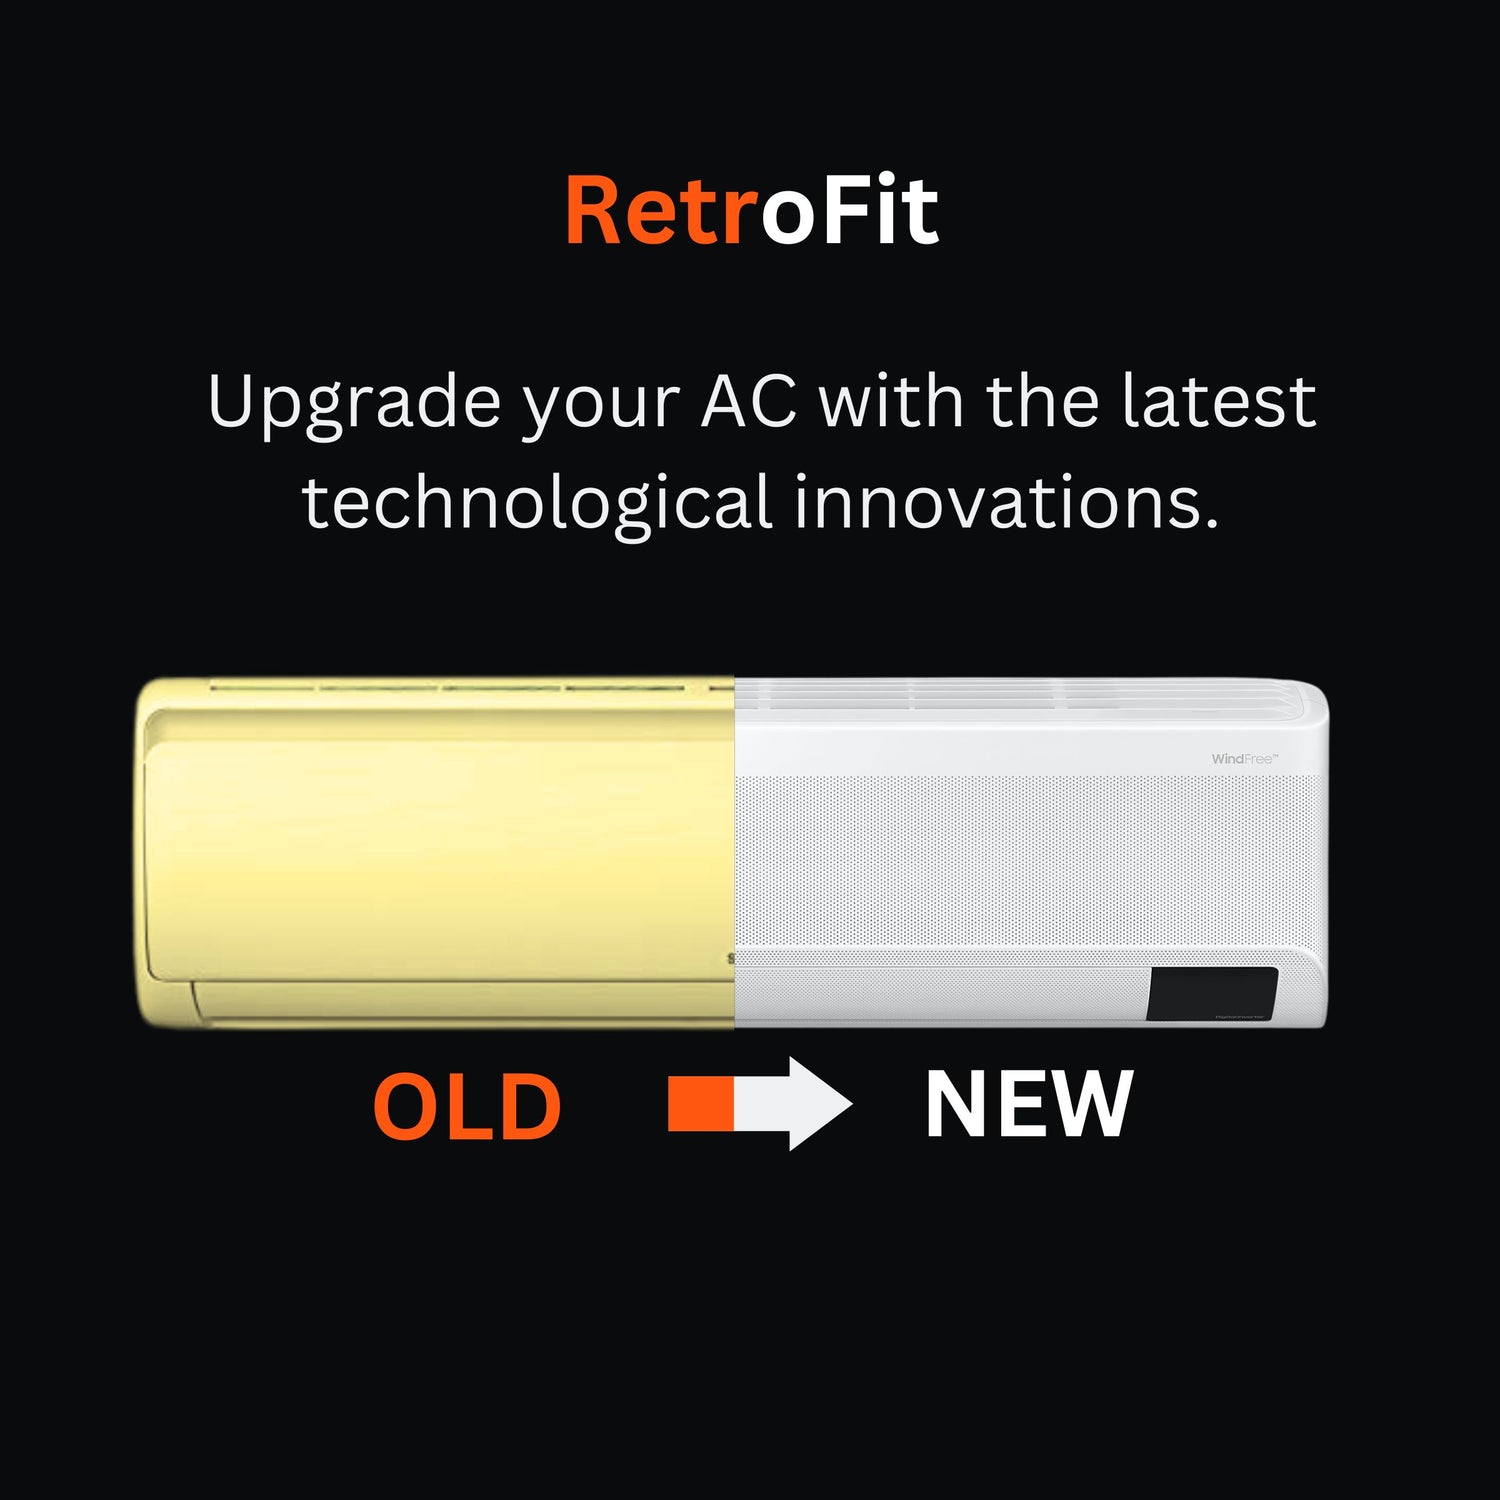 upgrade you old ac to new ac with aces retrofit service